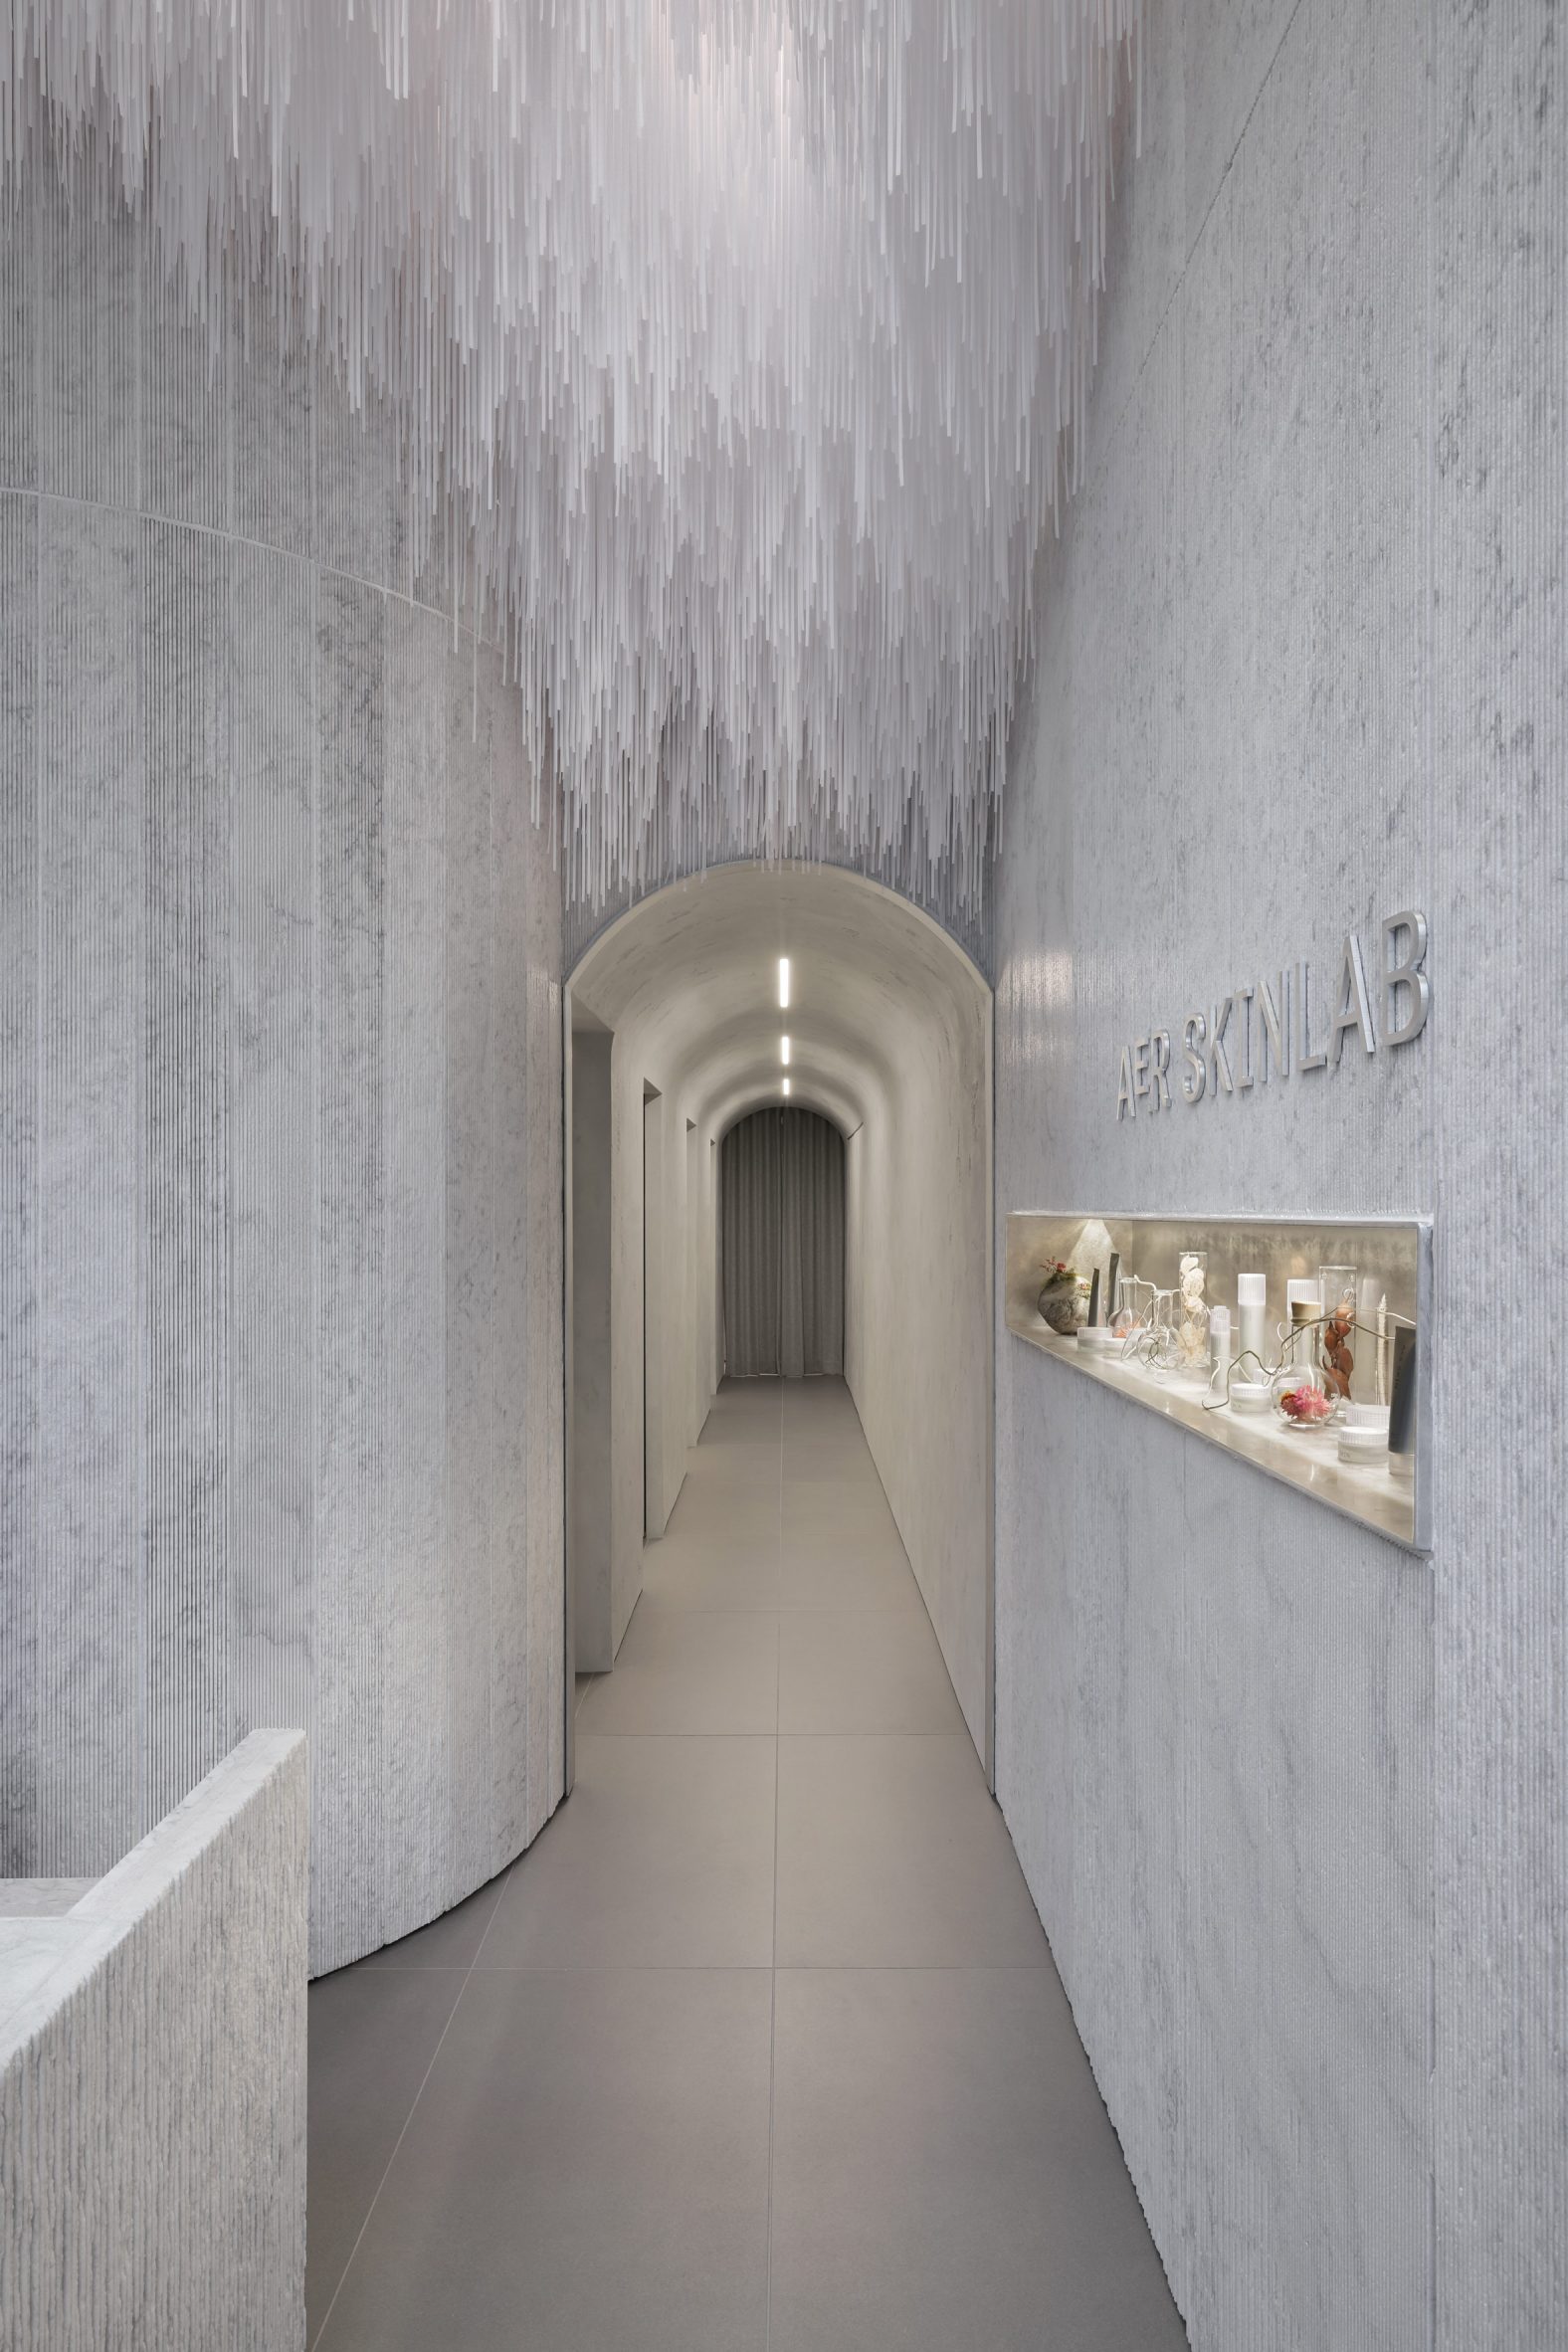 Marble-lined lobby of the Vancouver Skin Care Clinic, designed by Leckie Studio